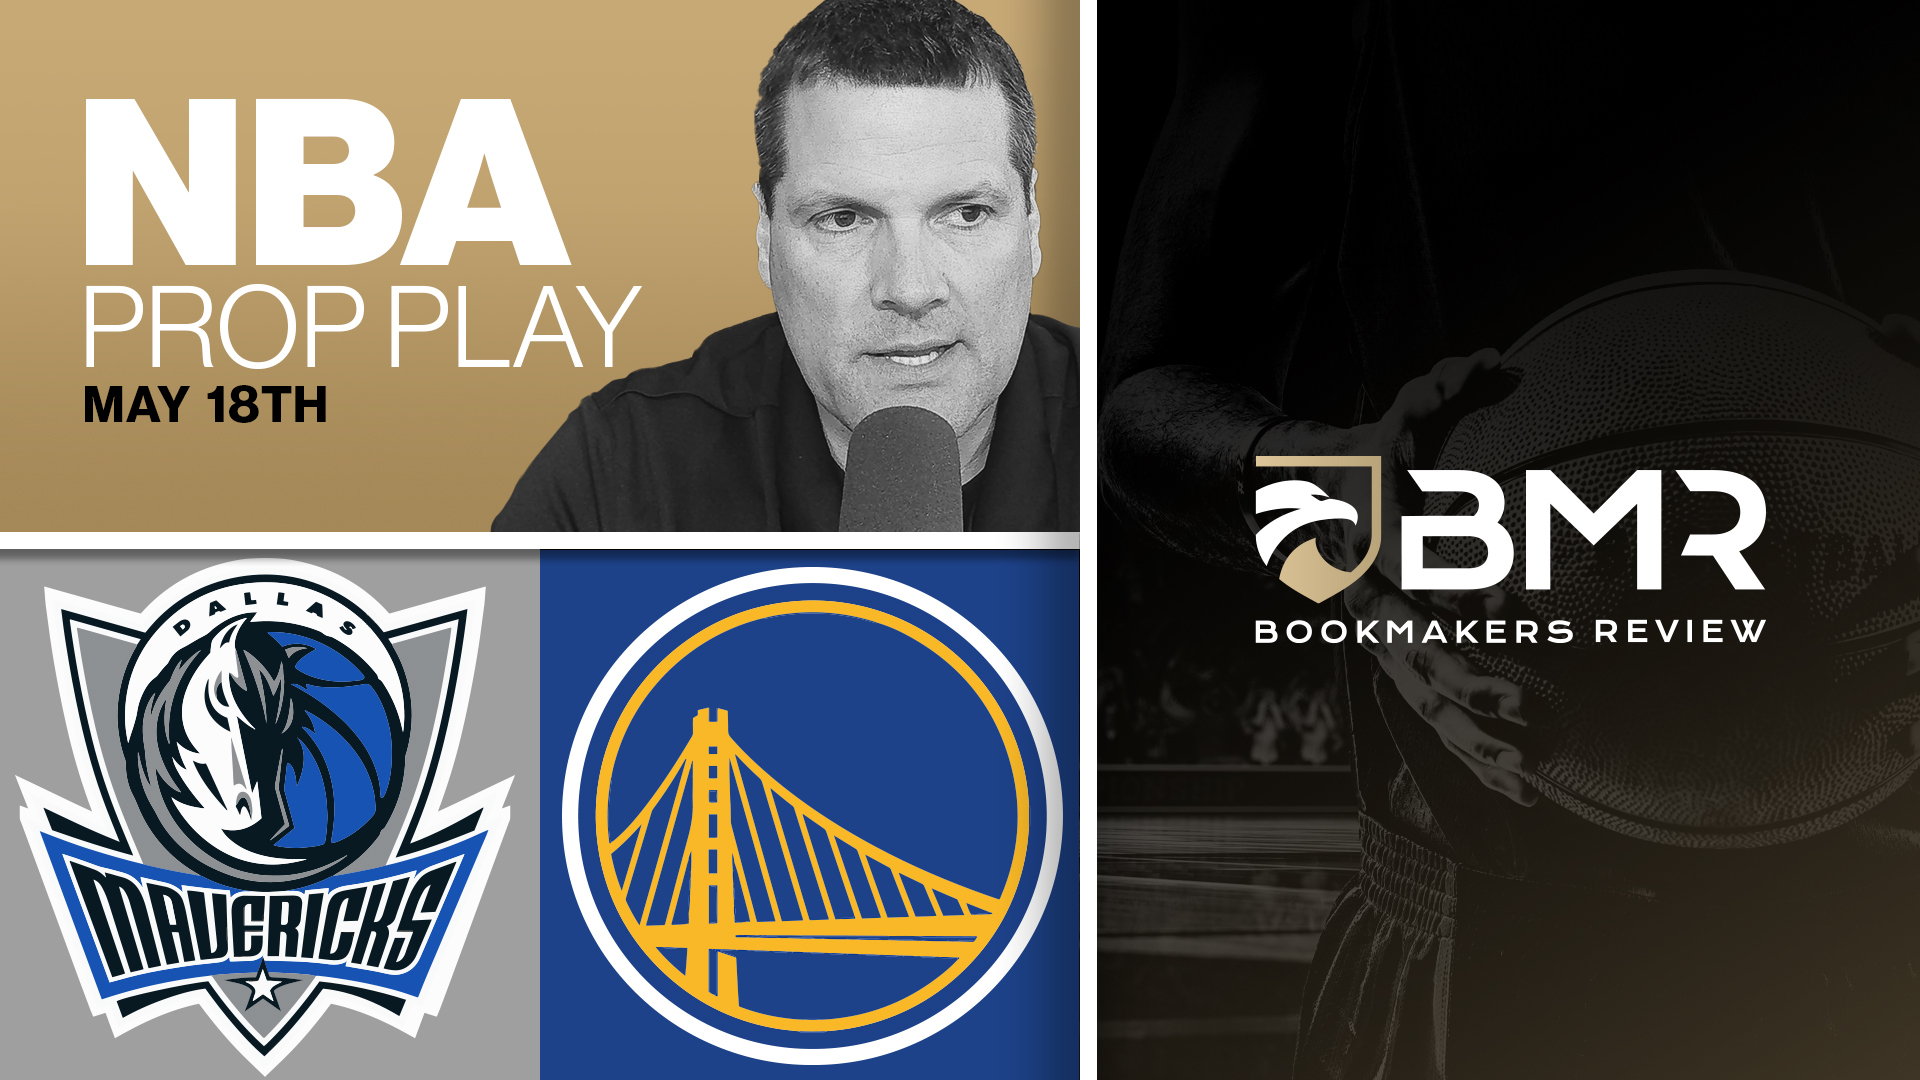 Mavericks vs. Warriors | Free NBA Playoffs Player Prop Pick by Donnie RightSide &#8211; May 18th